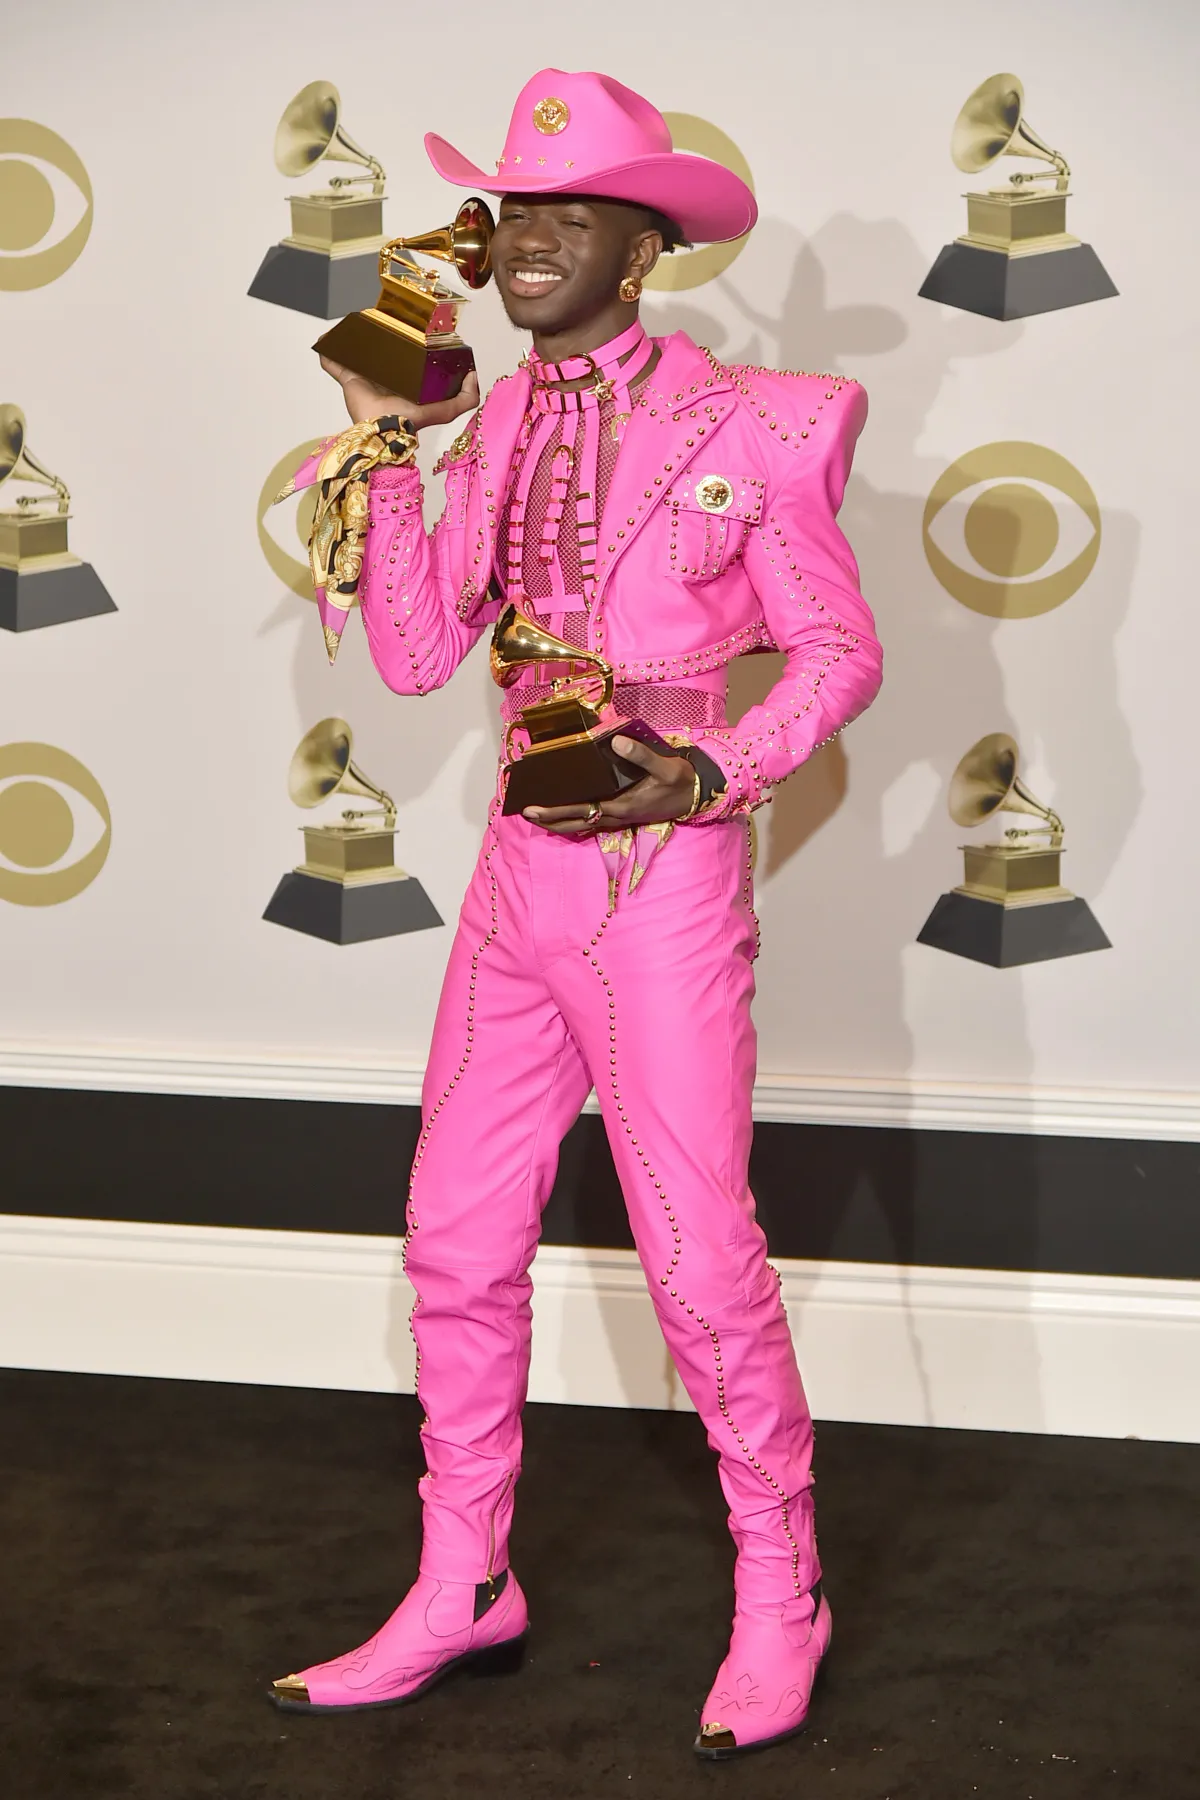 Lil Nas X at the 62nd Annual Grammy Awards on January 26, 2020 in California | Photo: Getty Images